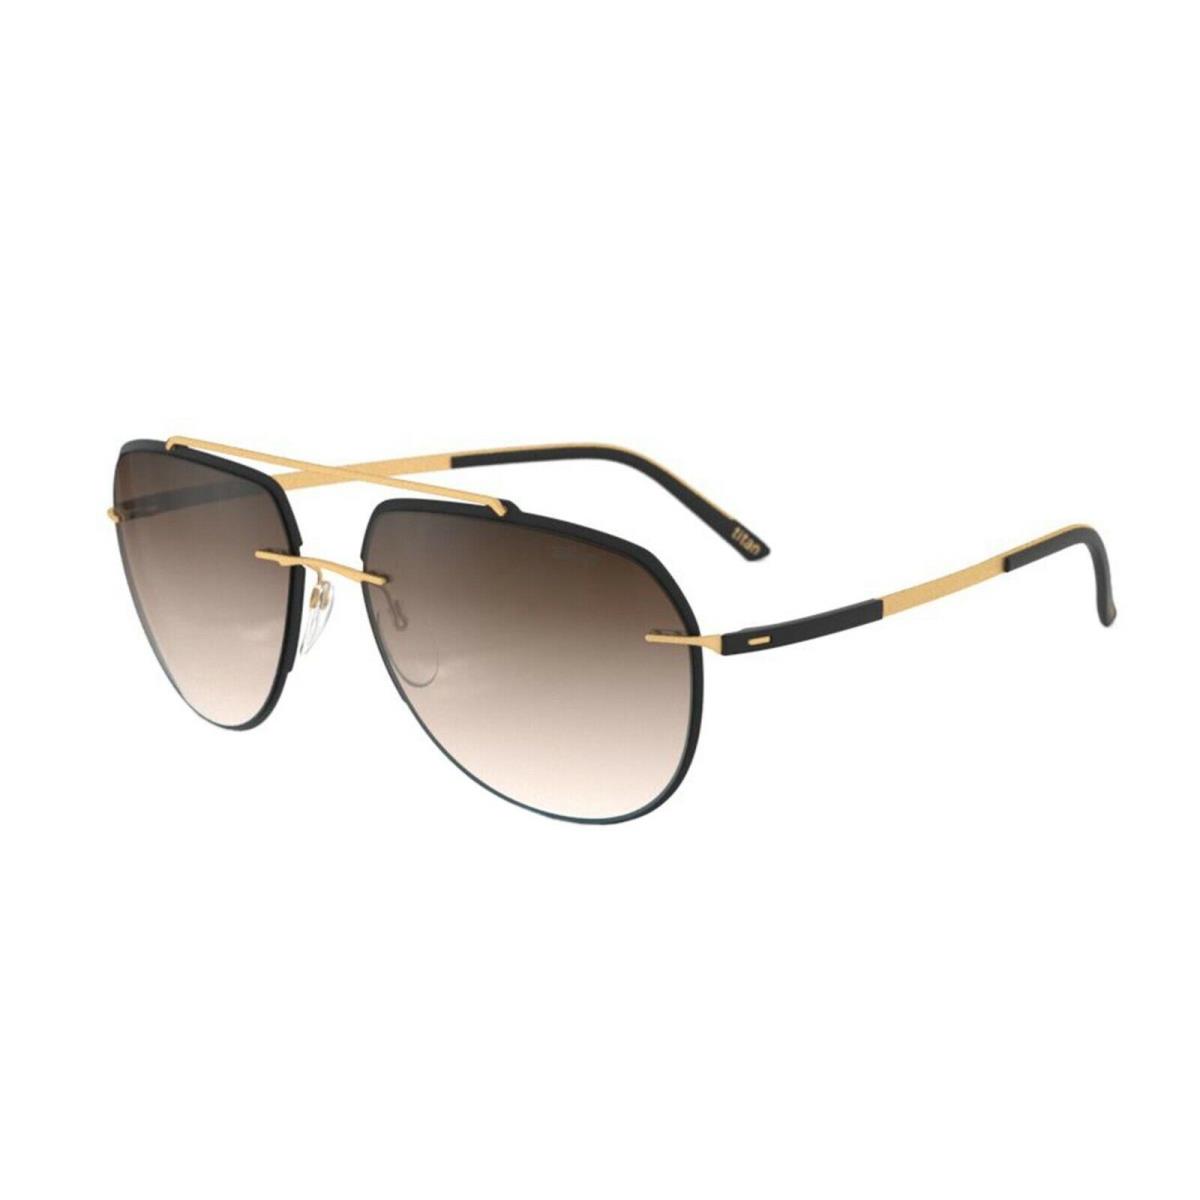 Silhouette Accent Shades 8719 Black Gold/brown Shaded 9030 Sunglasses